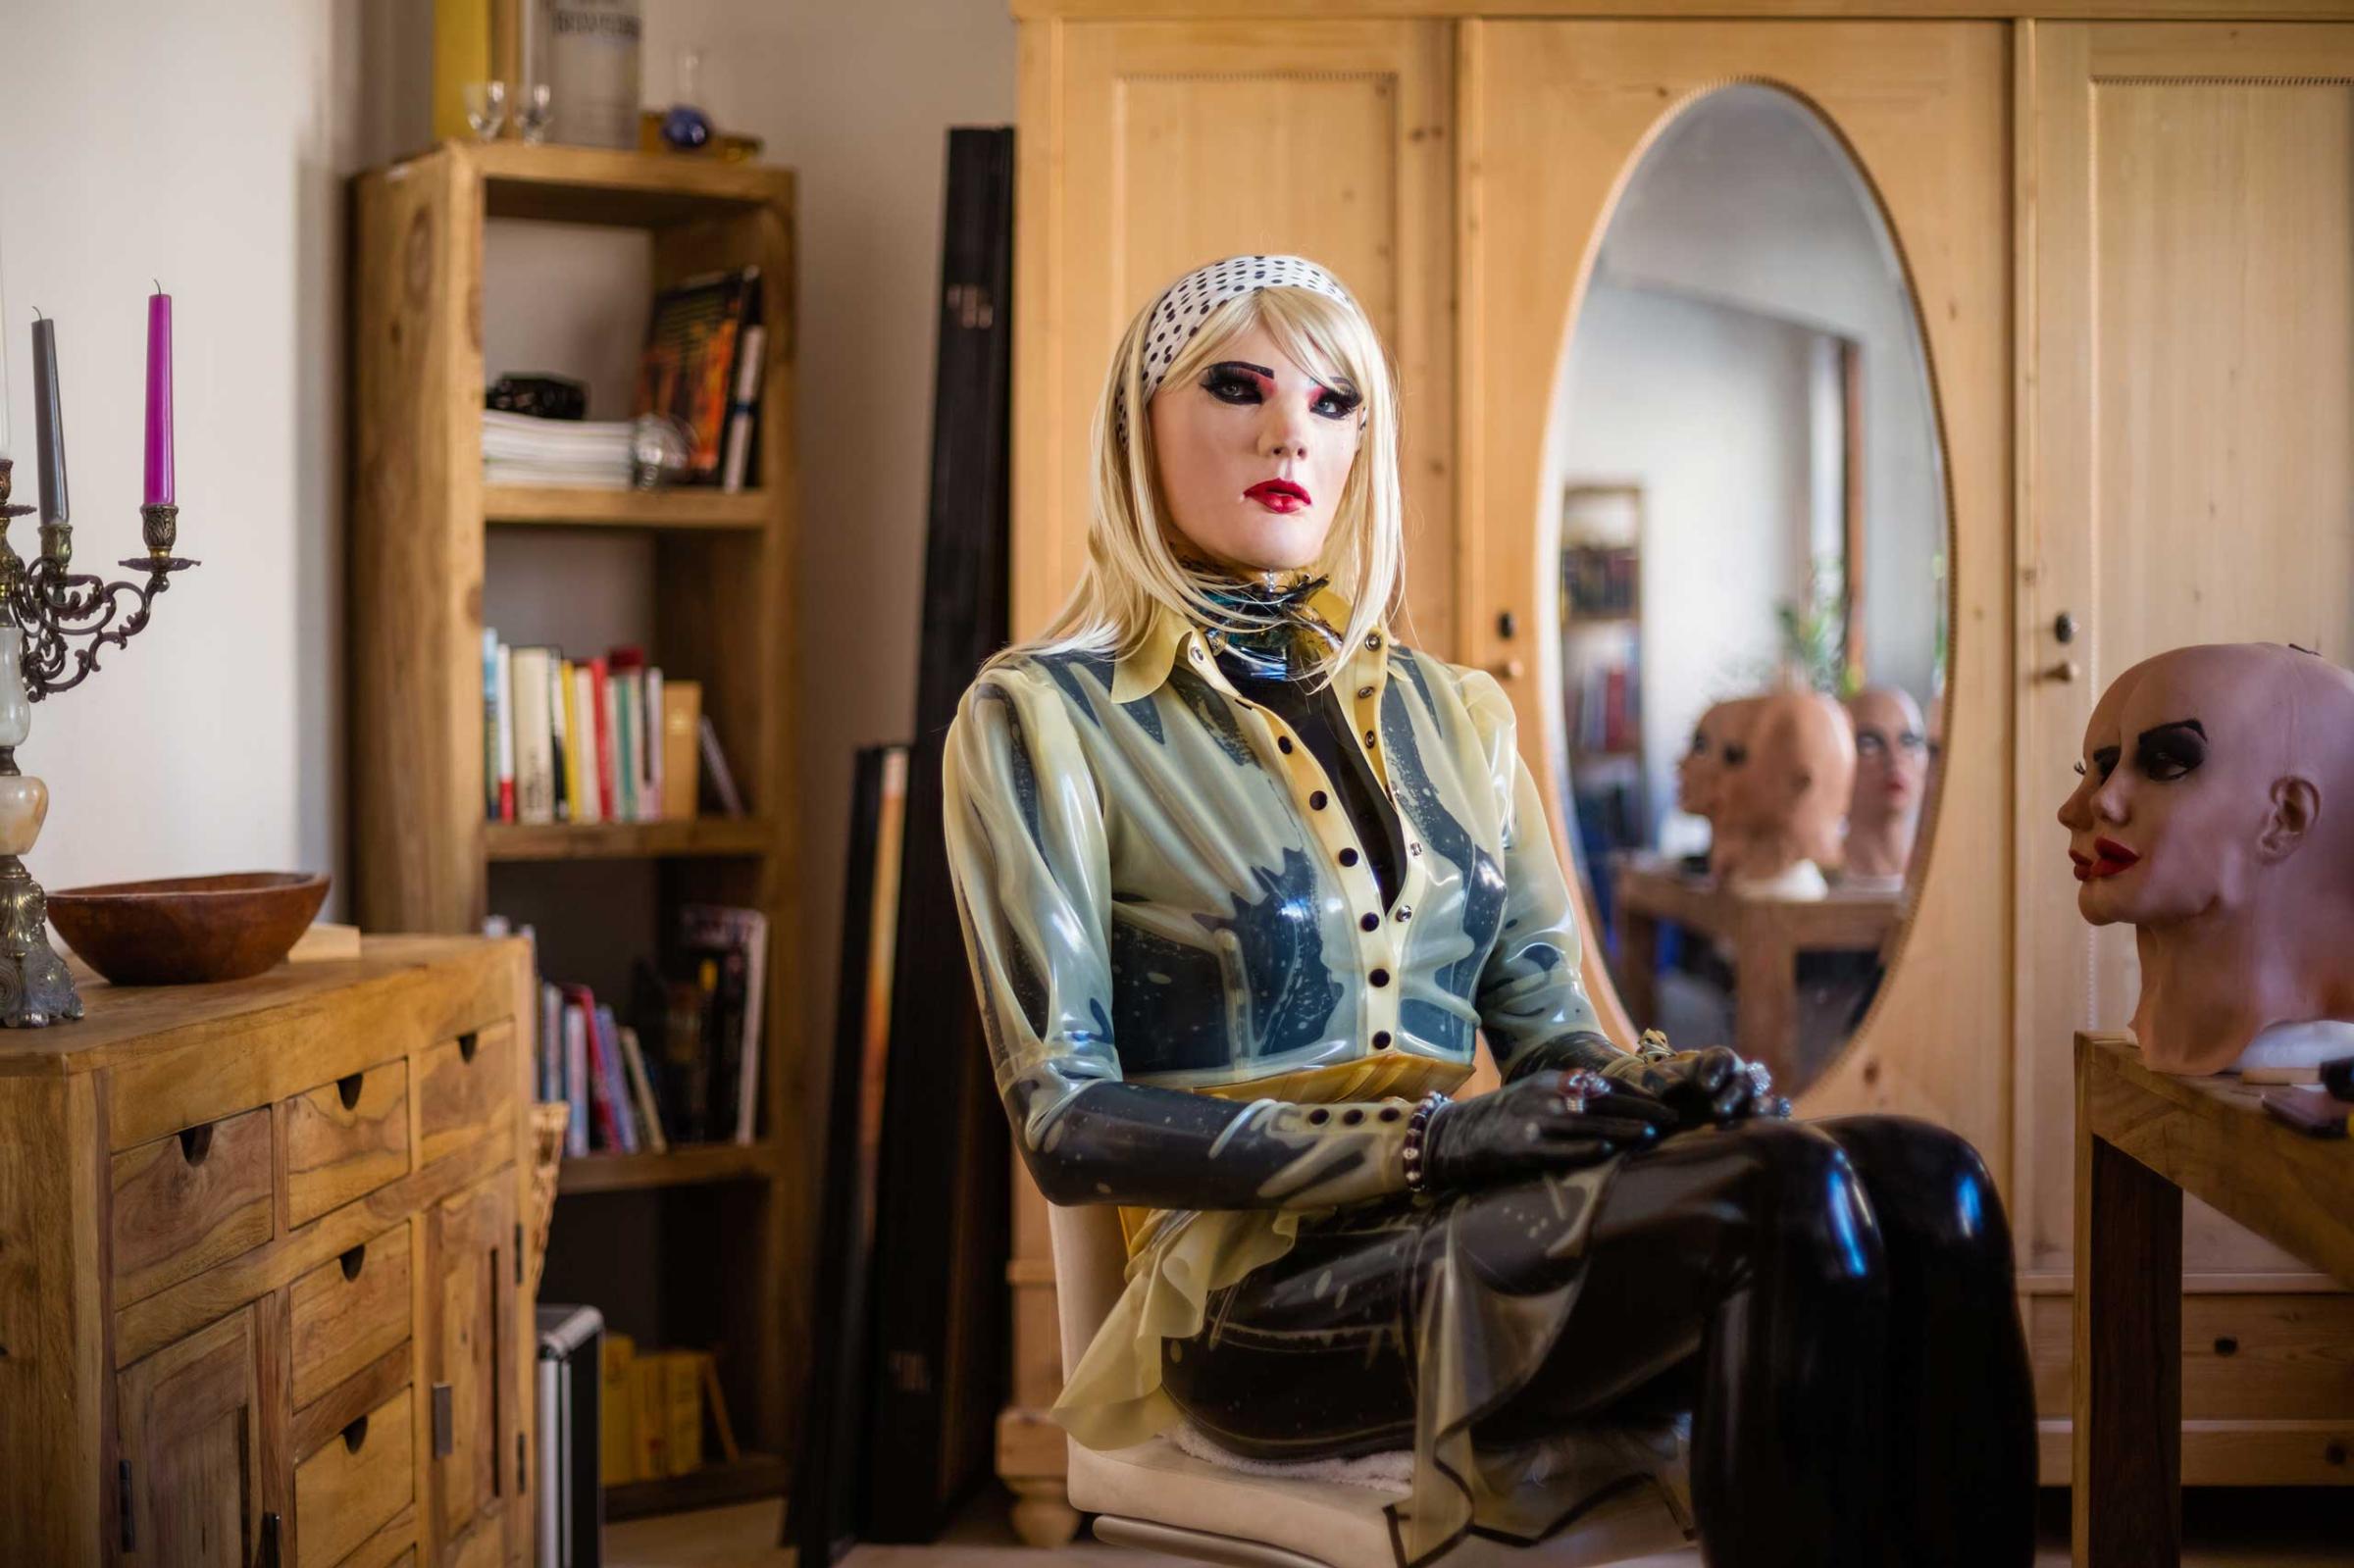 AUGSBURG, GERMANY - AUGUST 05, 2015: Portrait of female masker Christian alias 'Chrissie Seams', double the age of his alter ego, in his living-room, August 05, 2015 in Augsburg, Germany. Female masking presents an outlet for him, as a heterosexual and cisgender male, to live out his female side and latex fetish. On his right stand a variety of masks that he uses for experimenting with airbrushing and other alteration techniques in order to individualise the look of his alter ego. "Since my childhood I have been fascinated by latex, which very soon merged with my aspirations to look as sexy as a woman. I remember the first time I had the wish to slip into a woman’s skin was at the age of 14 when I saw a model wearing sexy lingerie in a Penthouse magazine. I imagined slipping into her skin, like slipping into a surface made from latex.I love the feeling of being encapsulated and the sensitization from head to toe when wearing latex. At the same time I endeavor aesthetics. Visually, I only like latex on women, hence I don’t gain anything from my fetish if not dressed as a woman myself. Many times I wondered if there was a Chrissie if it wasn’t for my passion for latex."- Female masker Christian alias Chrissie Seams, heterosexual man, double the age of his alter ego